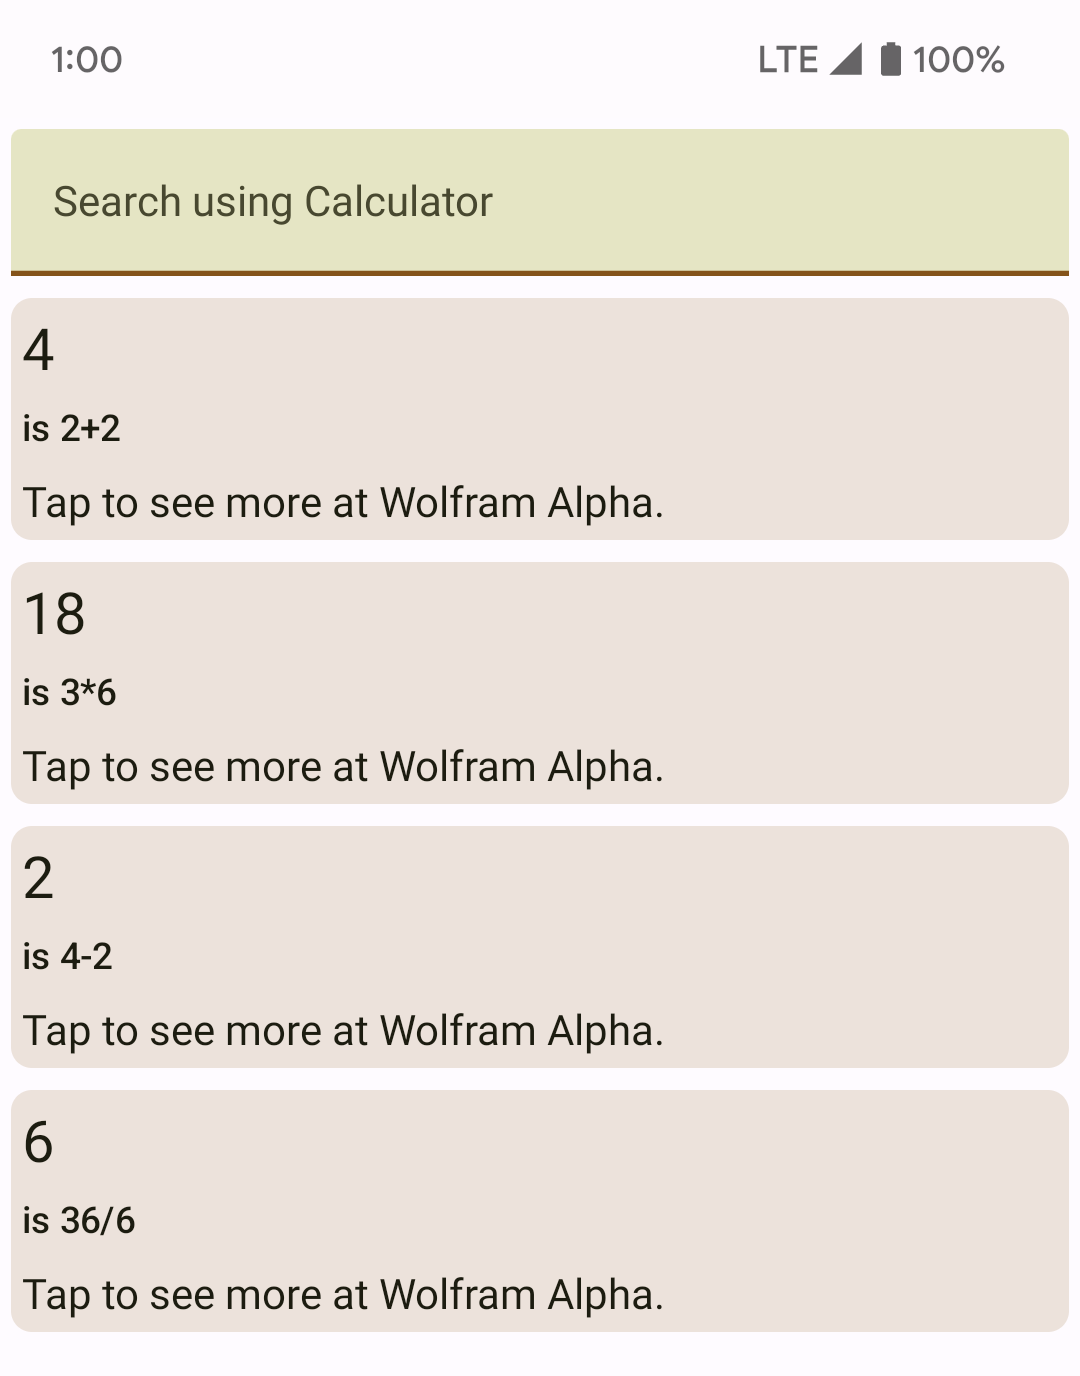 Image of Gugal's search results page showing 4 results with performed calculations: 4 is 2+2, 18 is 3*6, 2 is 4-2, 6 is 36/6